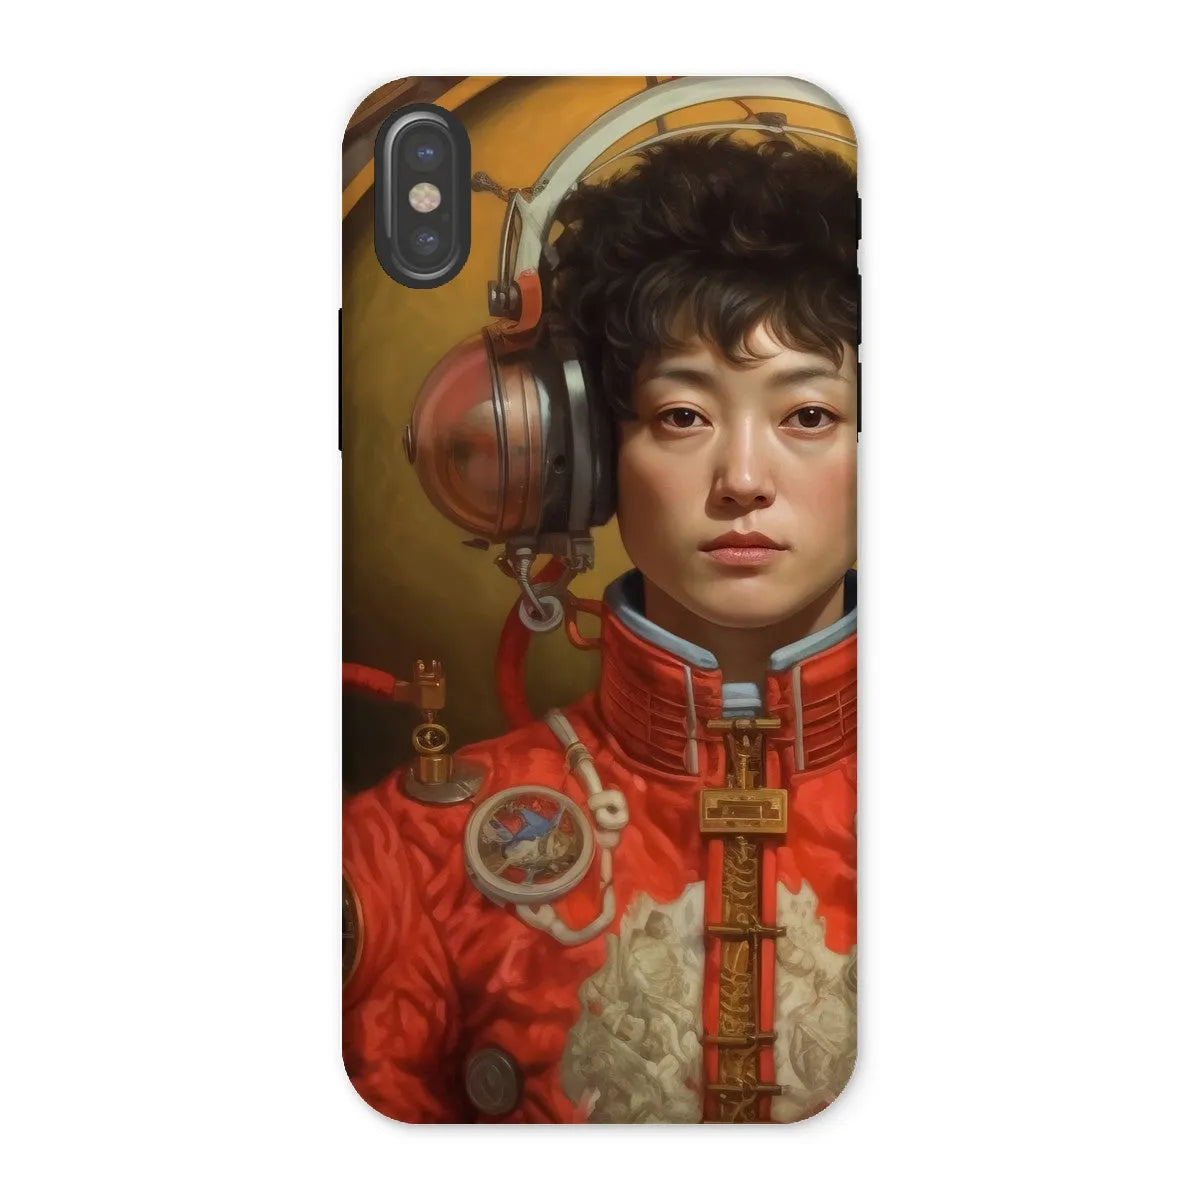 Mùchén - Gay Chinese Astronaut Aesthetic Phone Case - Iphone x / Matte - Mobile Phone Cases - Aesthetic Art